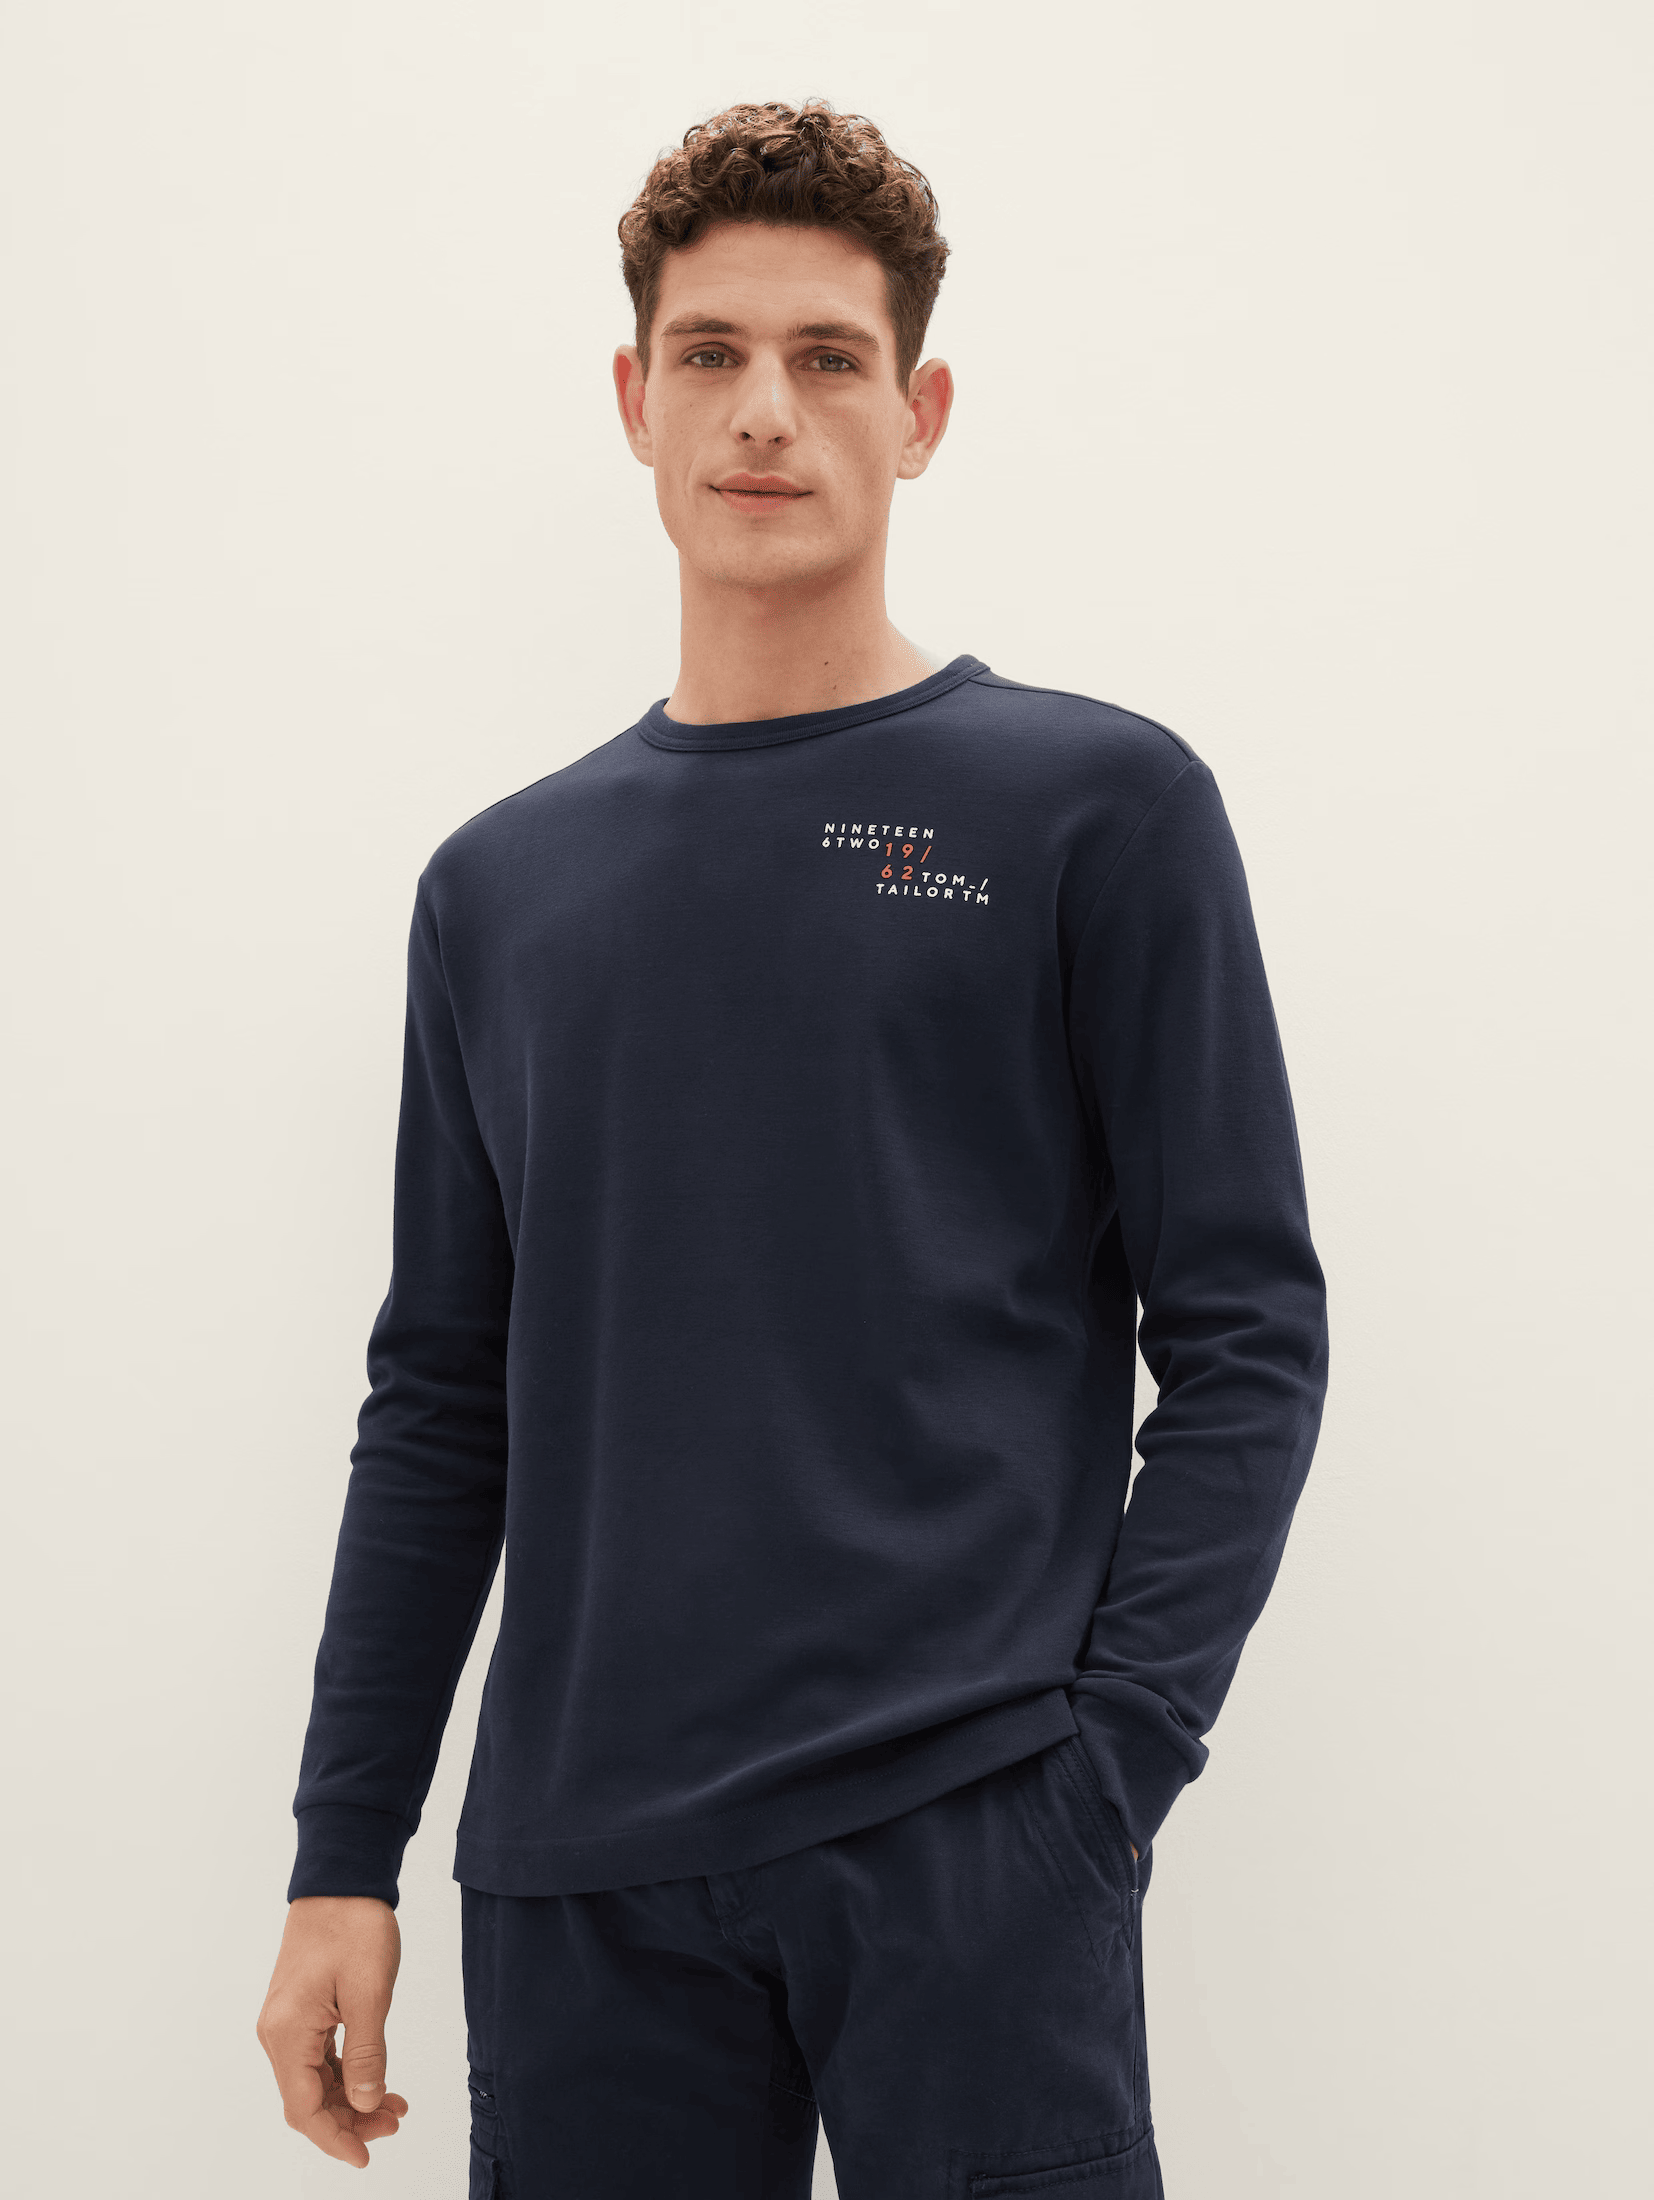 Tom Tailor Navy Basic Long-sleeved T-shirt With A Print